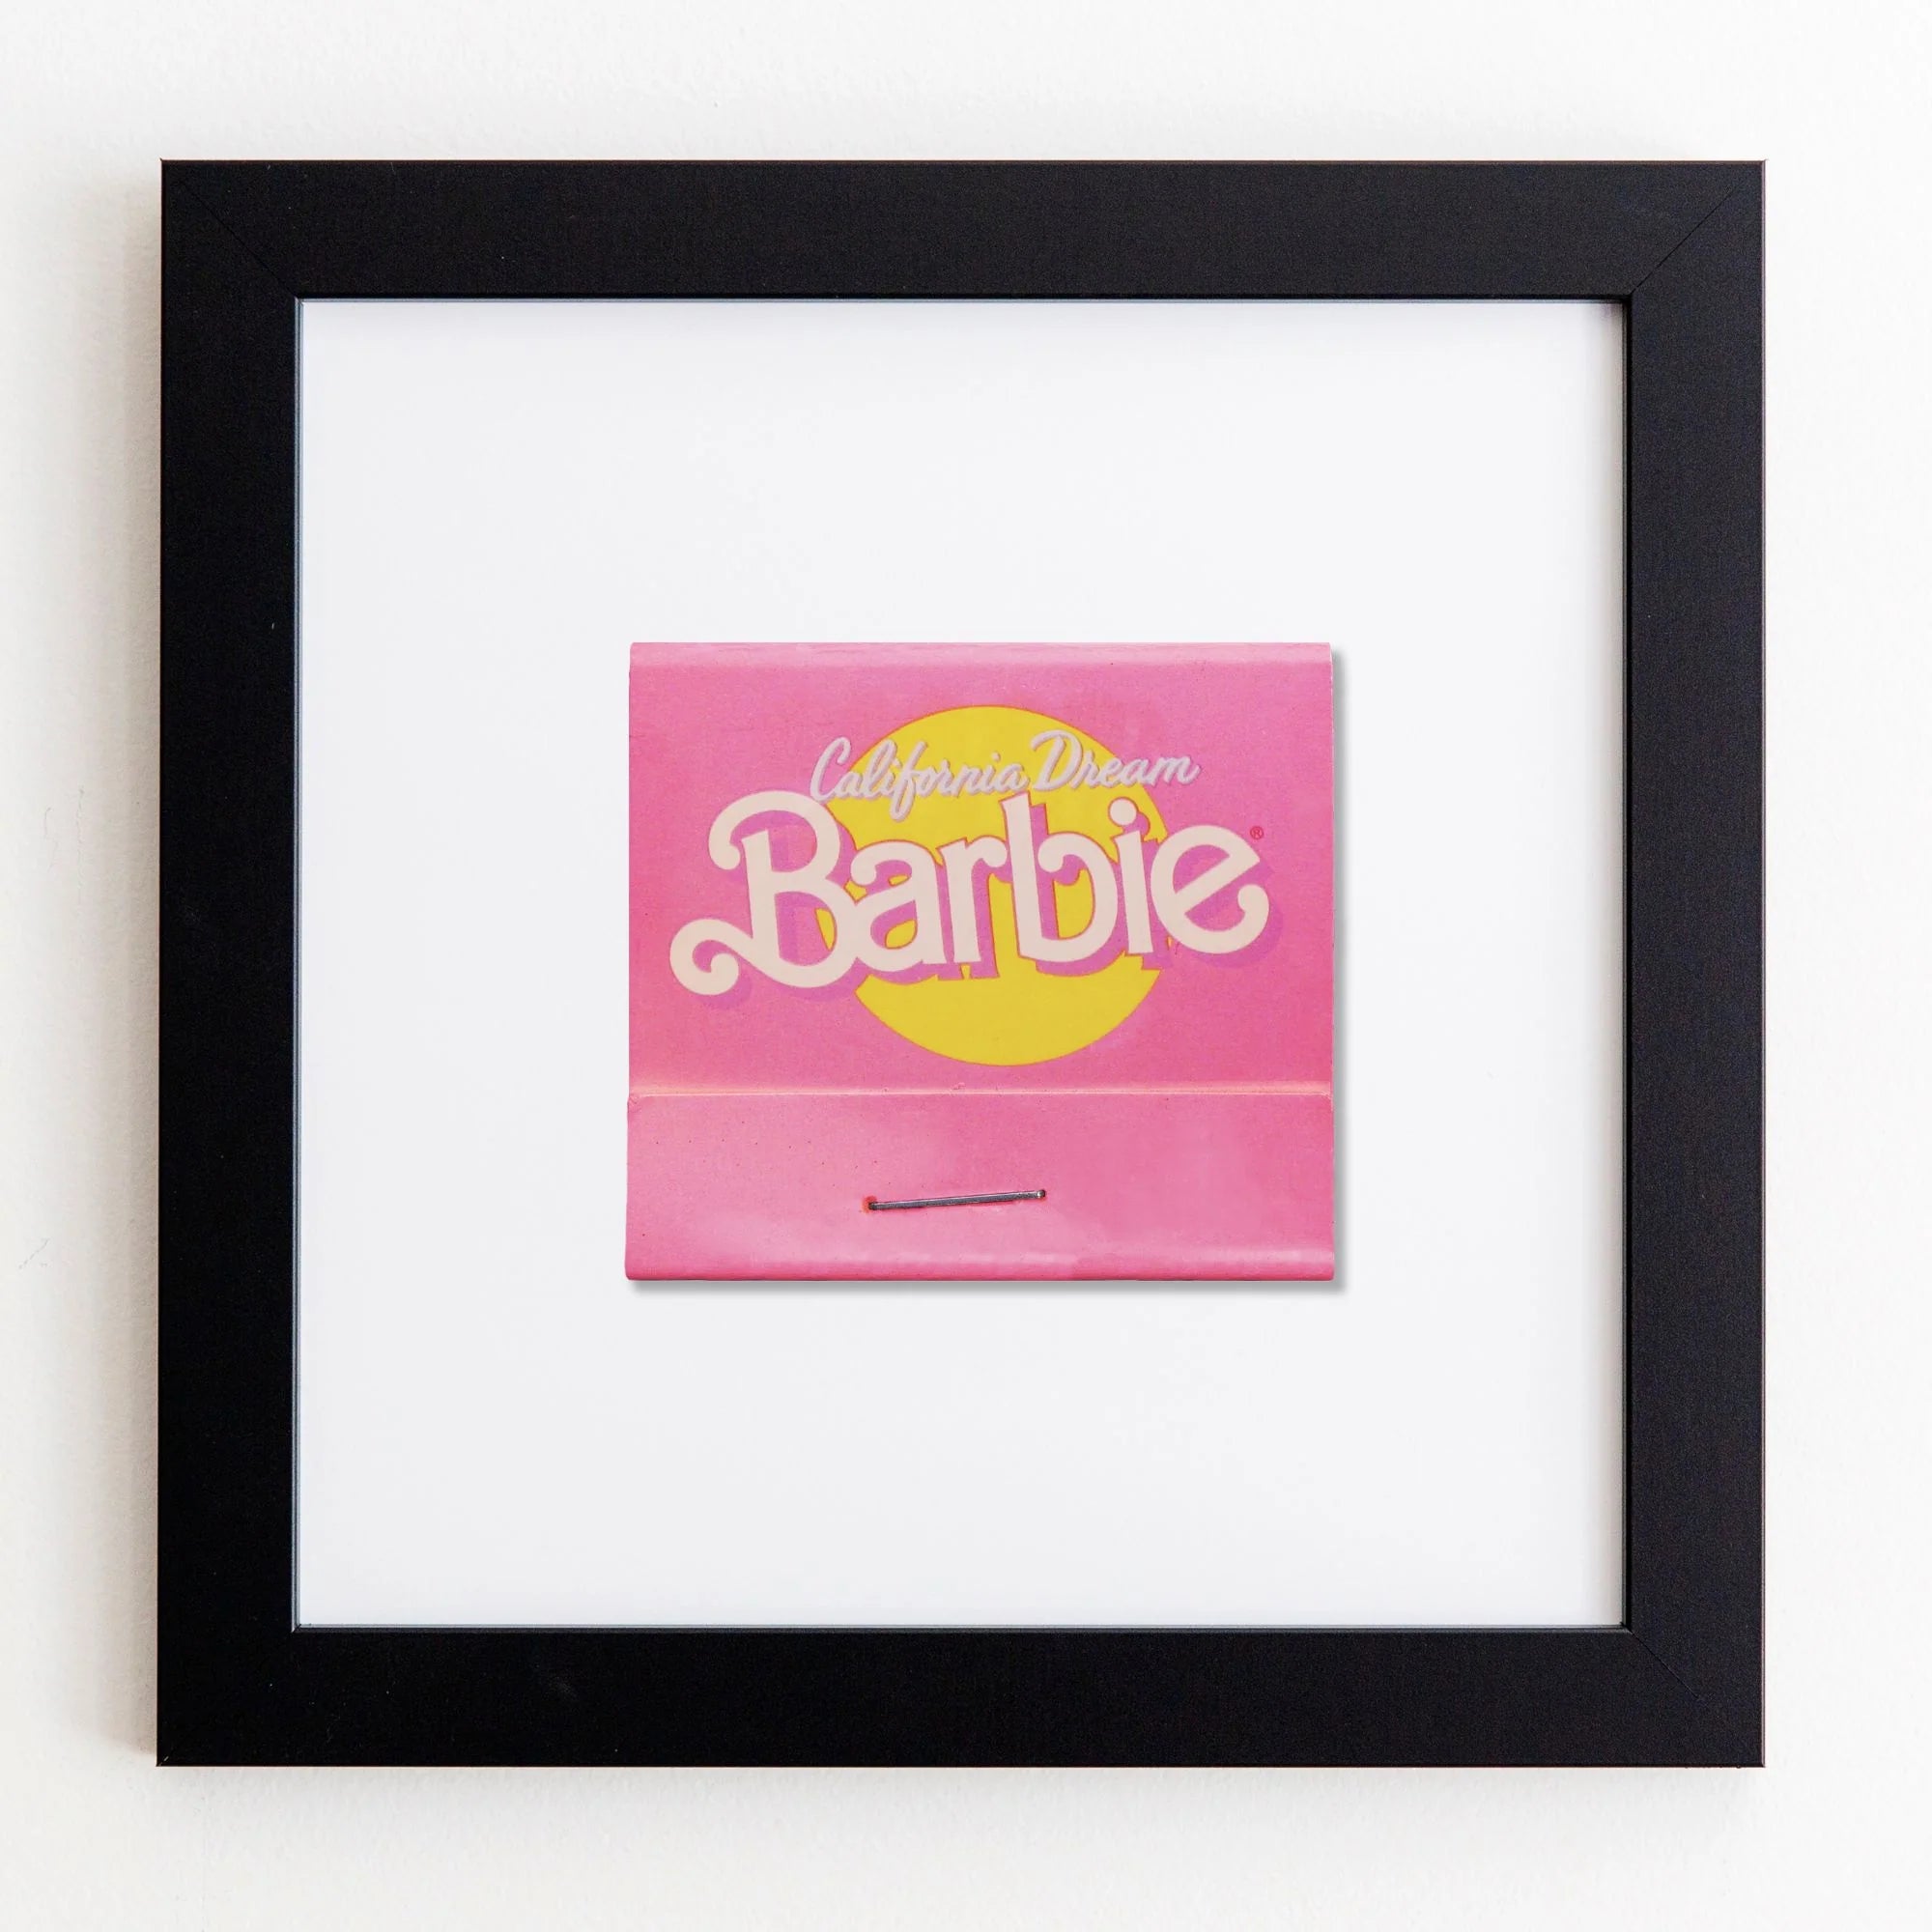 A framed Barbie board game titled &quot;California Dream,&quot; prominently displaying a pink box with yellow accents, mounted on a white acrylic background within a Match South Art Square Black Frame.